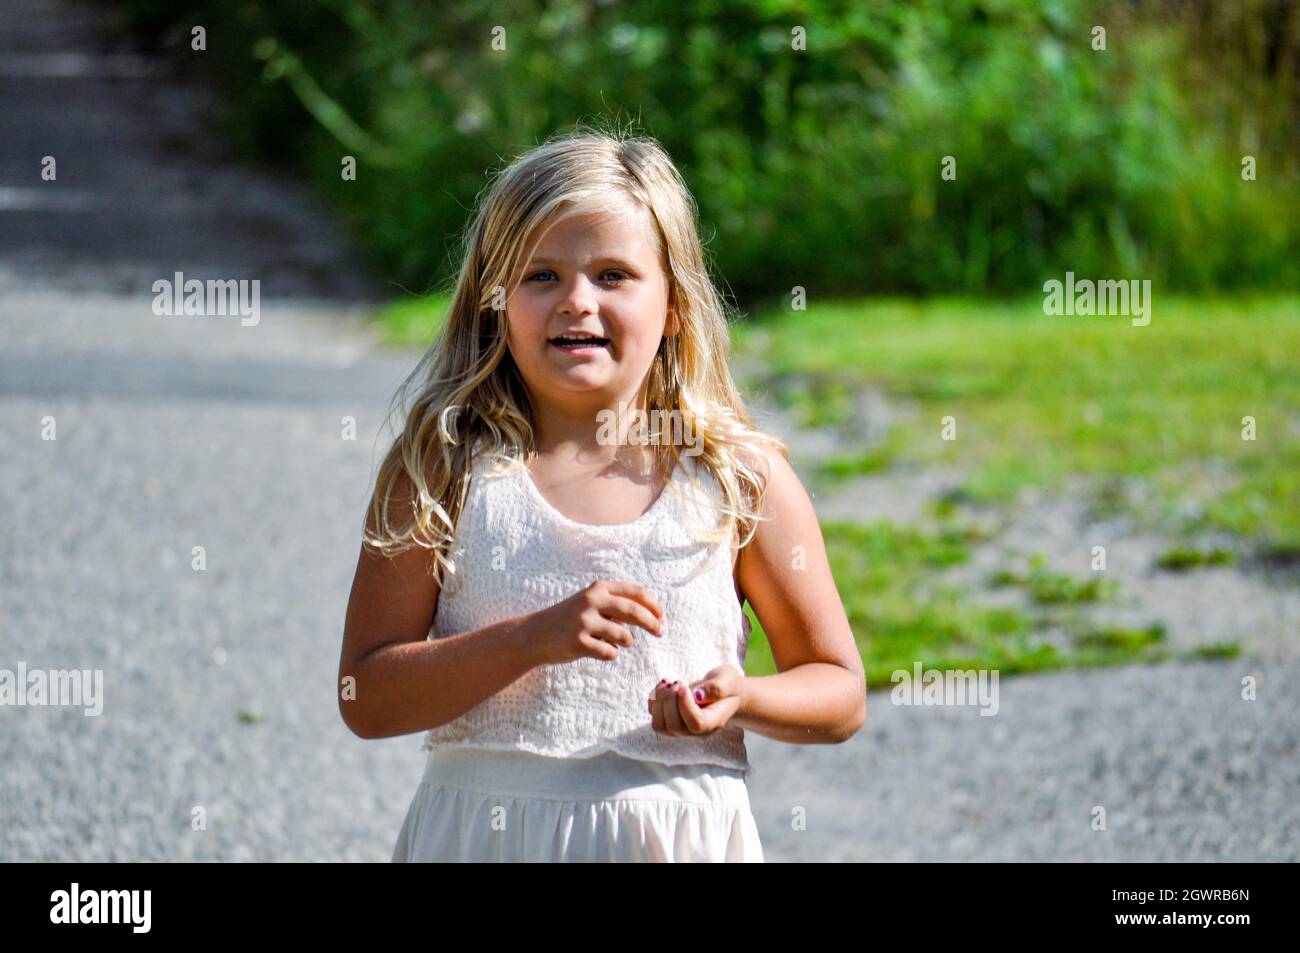 Portrait Of A Smiling Girl Standing Outdoors Stock Photo